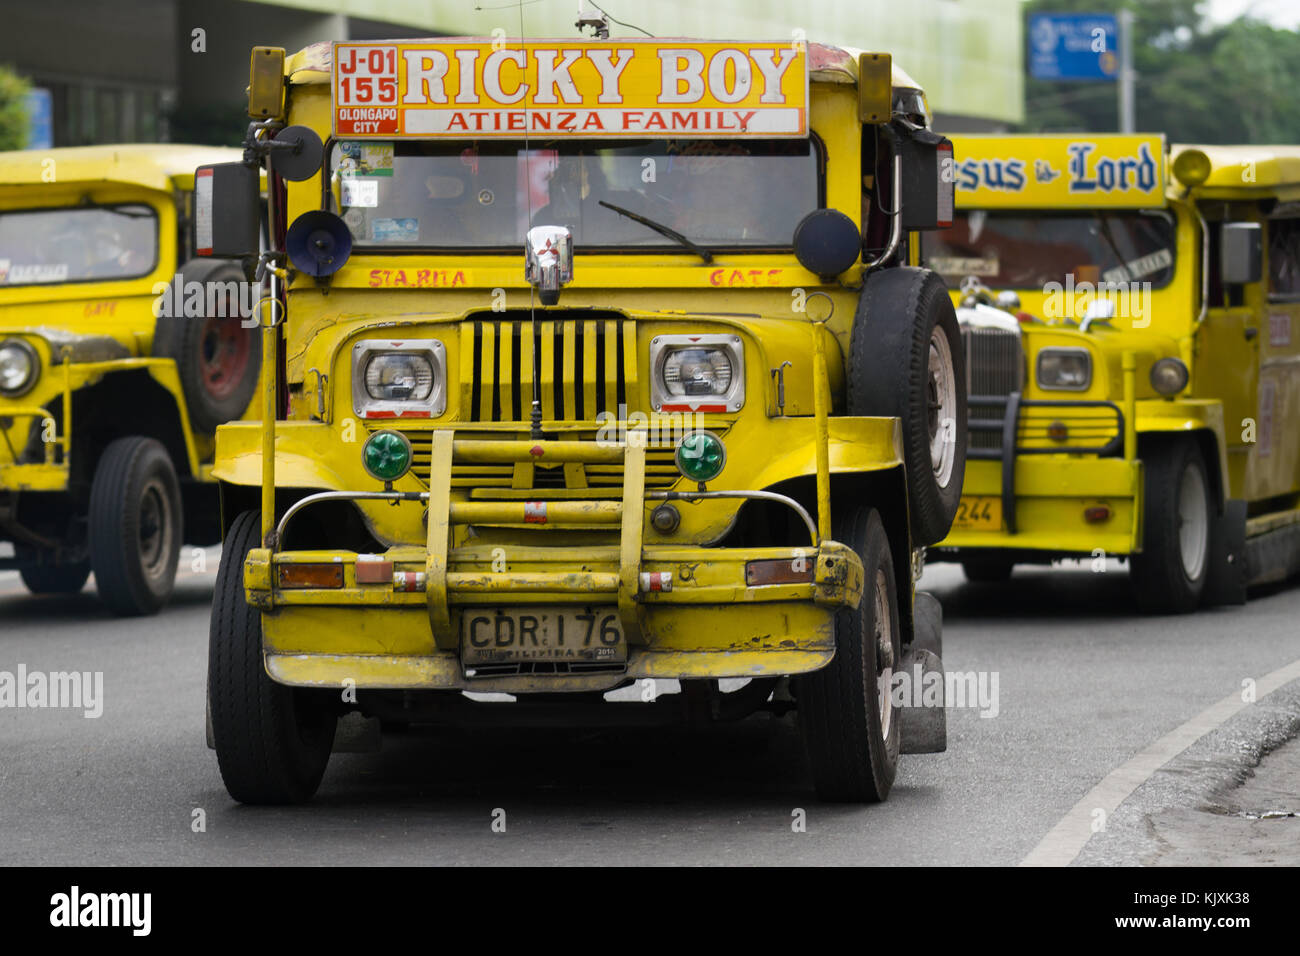 A yellow Public Utility Jeepney Vehicle being driven in Olongapo City,Bataan,Philippines Stock Photo